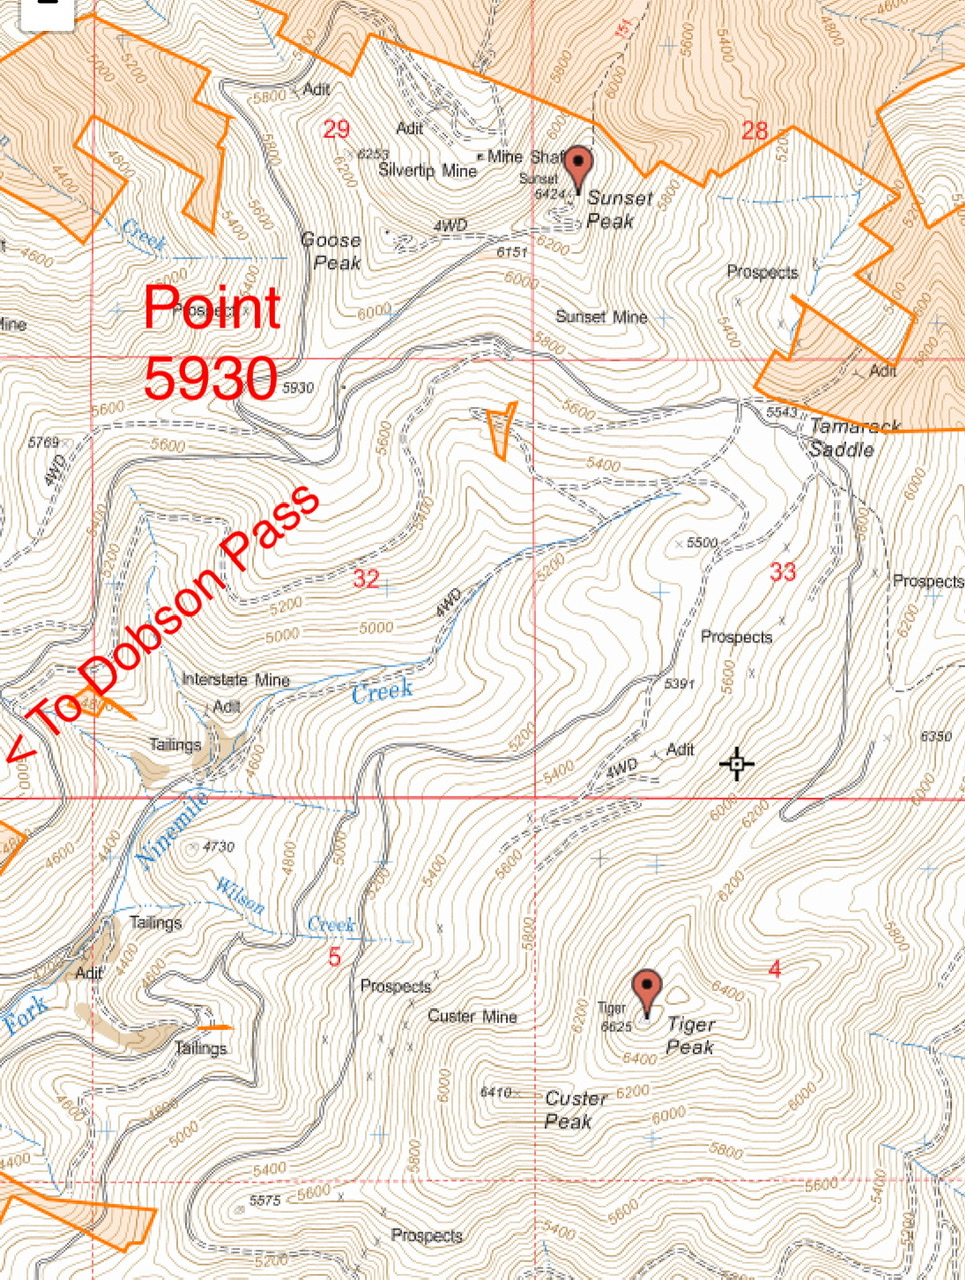 This map taken from a USFS topo, shows the driving route from Point 5930. The non-shaded area is private property.